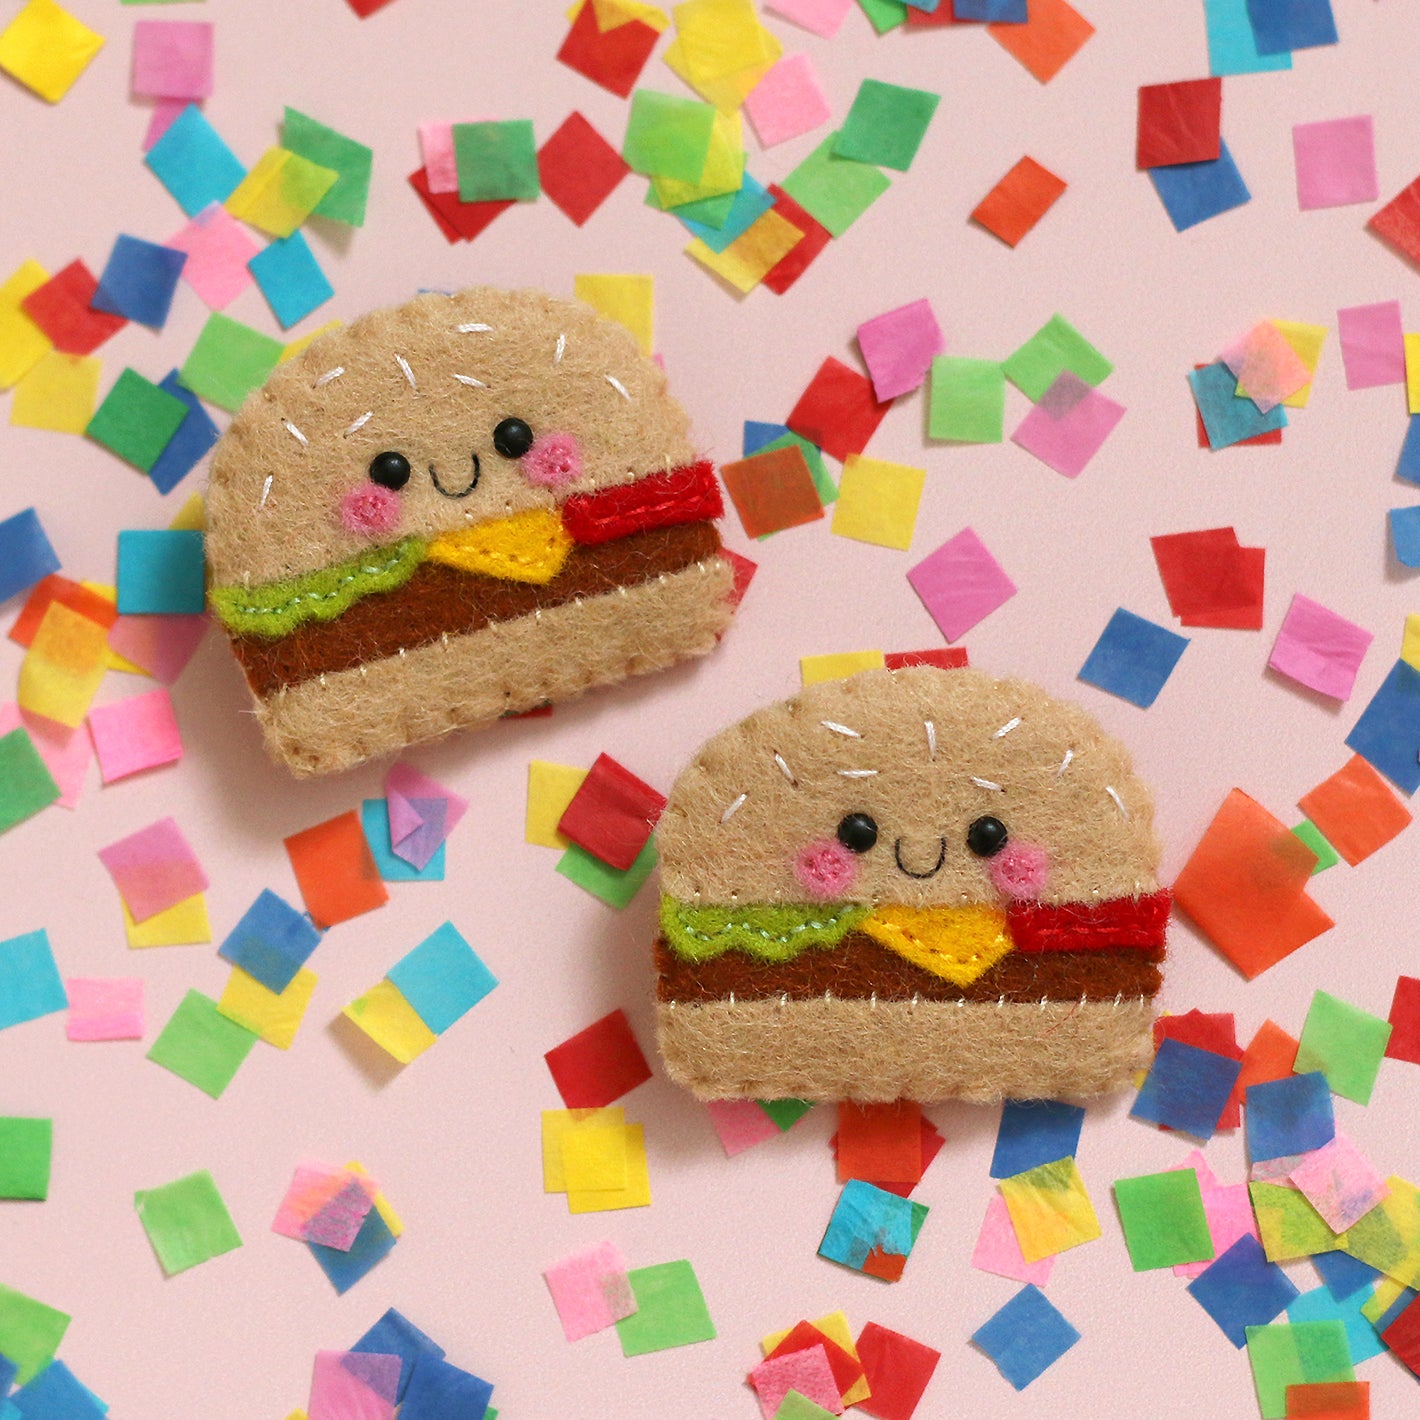 Cheeseburger felt brooches on a confetti sprinkle background by hannahdoodle